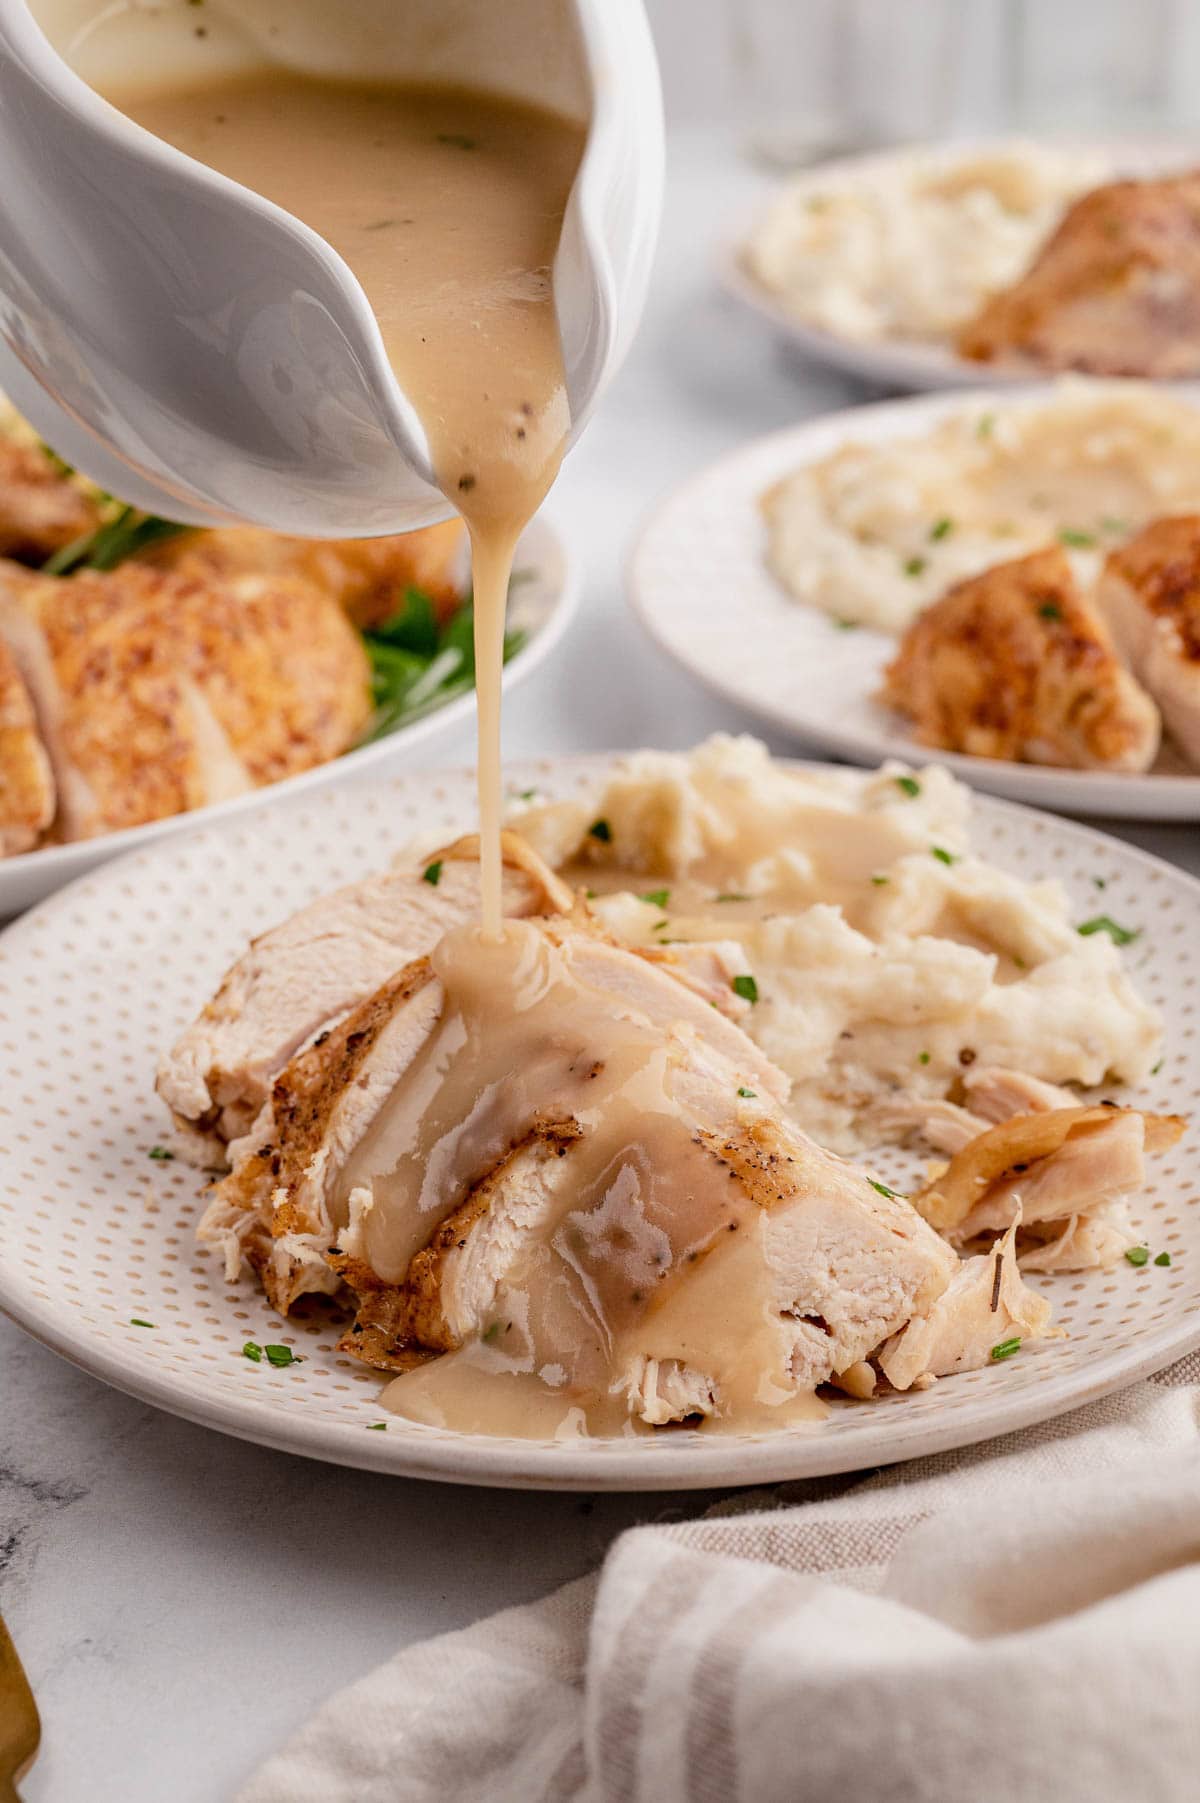 Sliced chicken breast and mashed potatoes on a white plate, a gravy boat pouring gravy over the chicken.